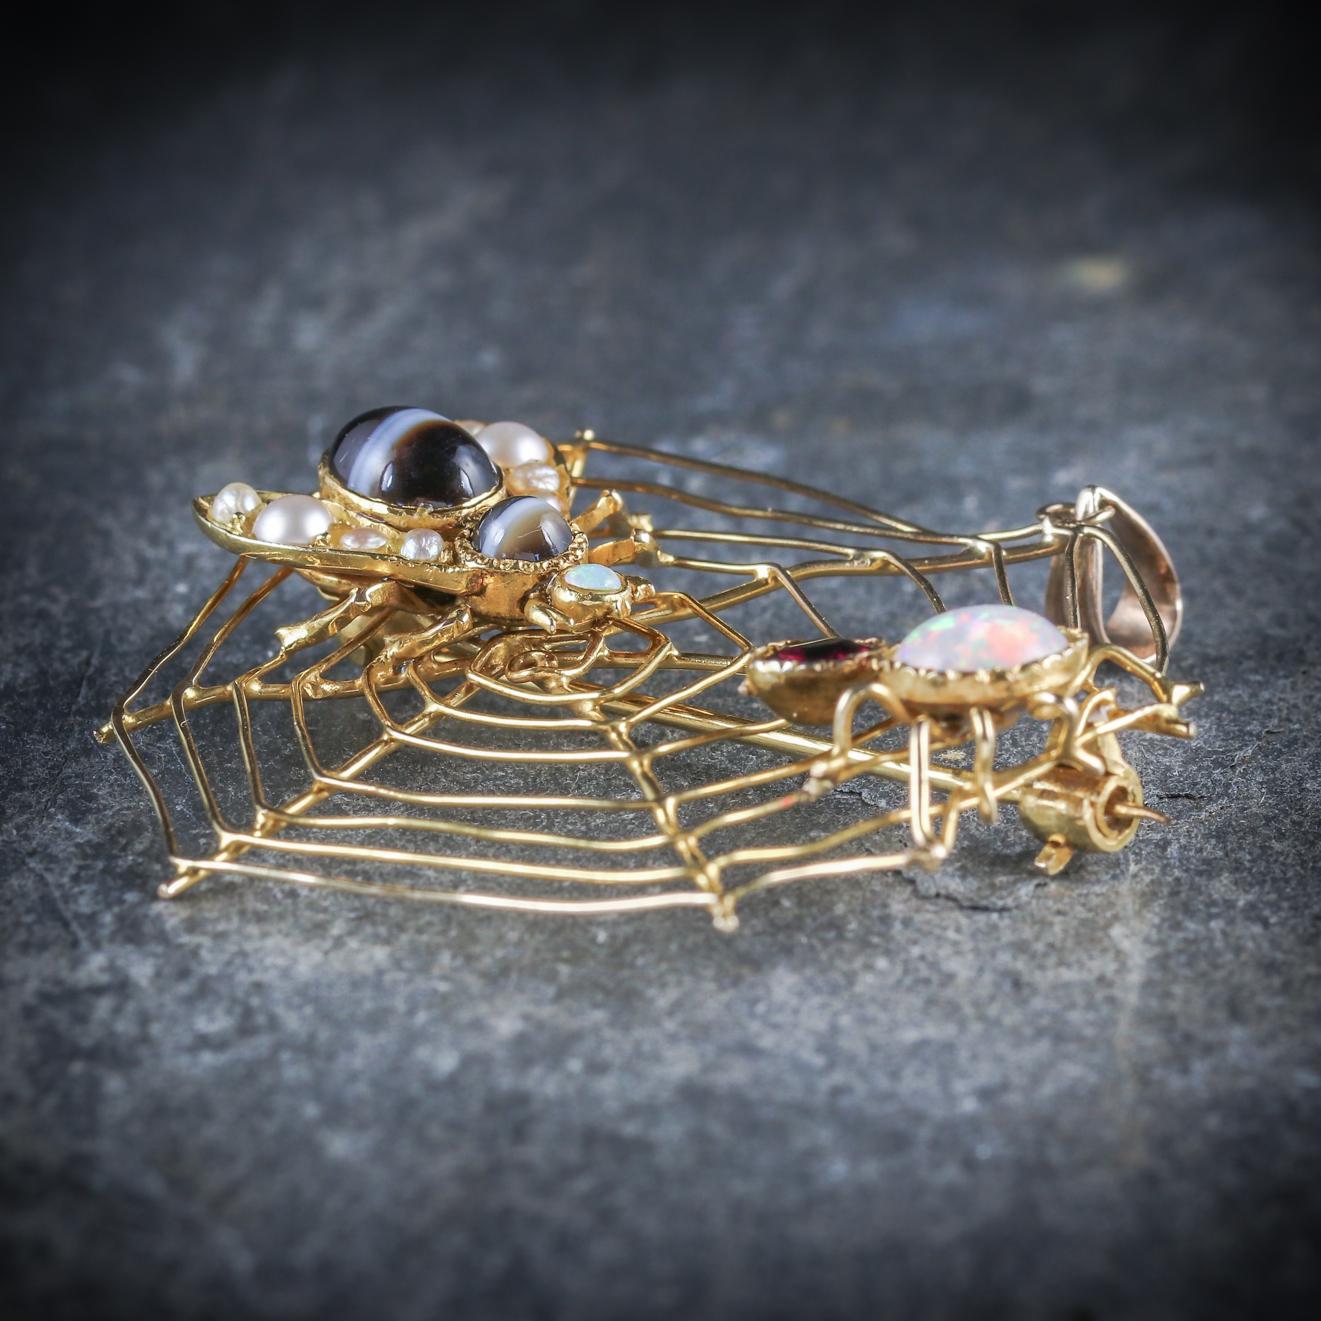 Antique Victorian Insect Brooch 15 Carat Gold Spider and Fly Pendant, circa 1900 For Sale 1